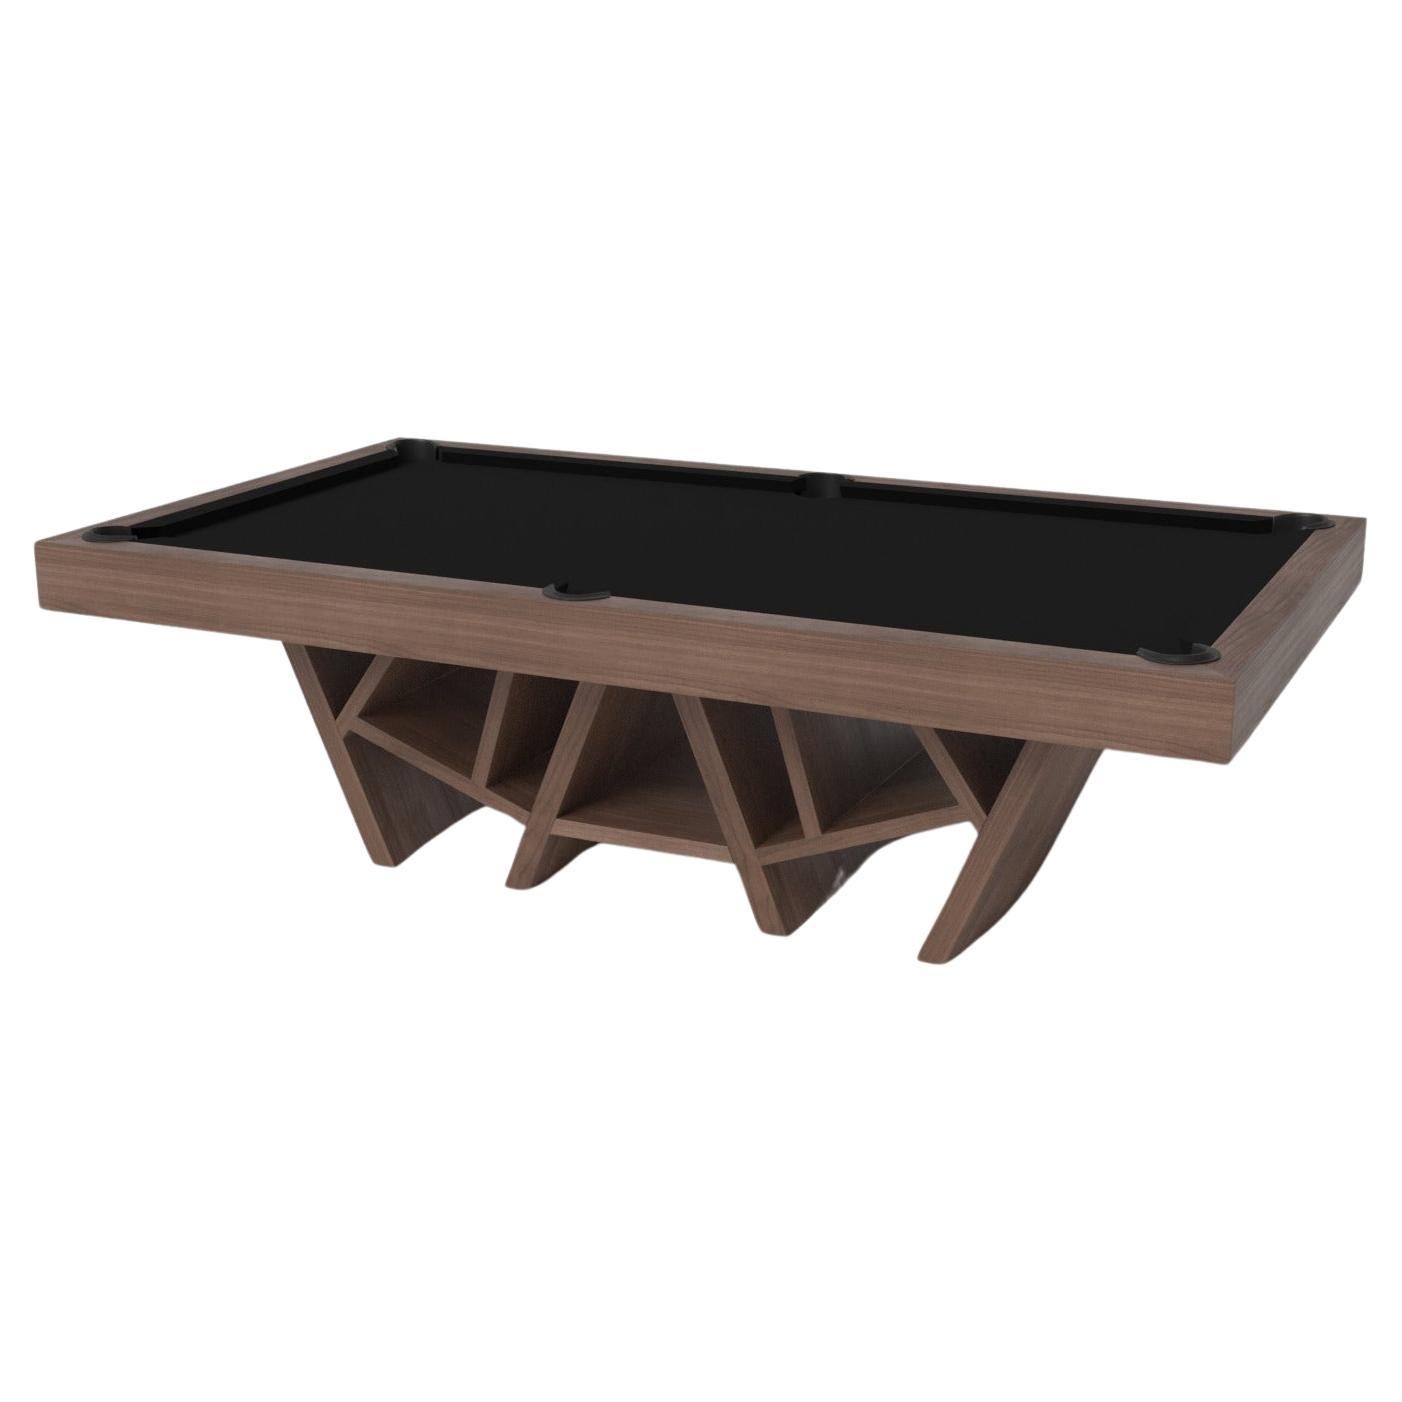 Elevate Customs Maze Pool Table / Solid Walnut Wood in 9' - Made in USA